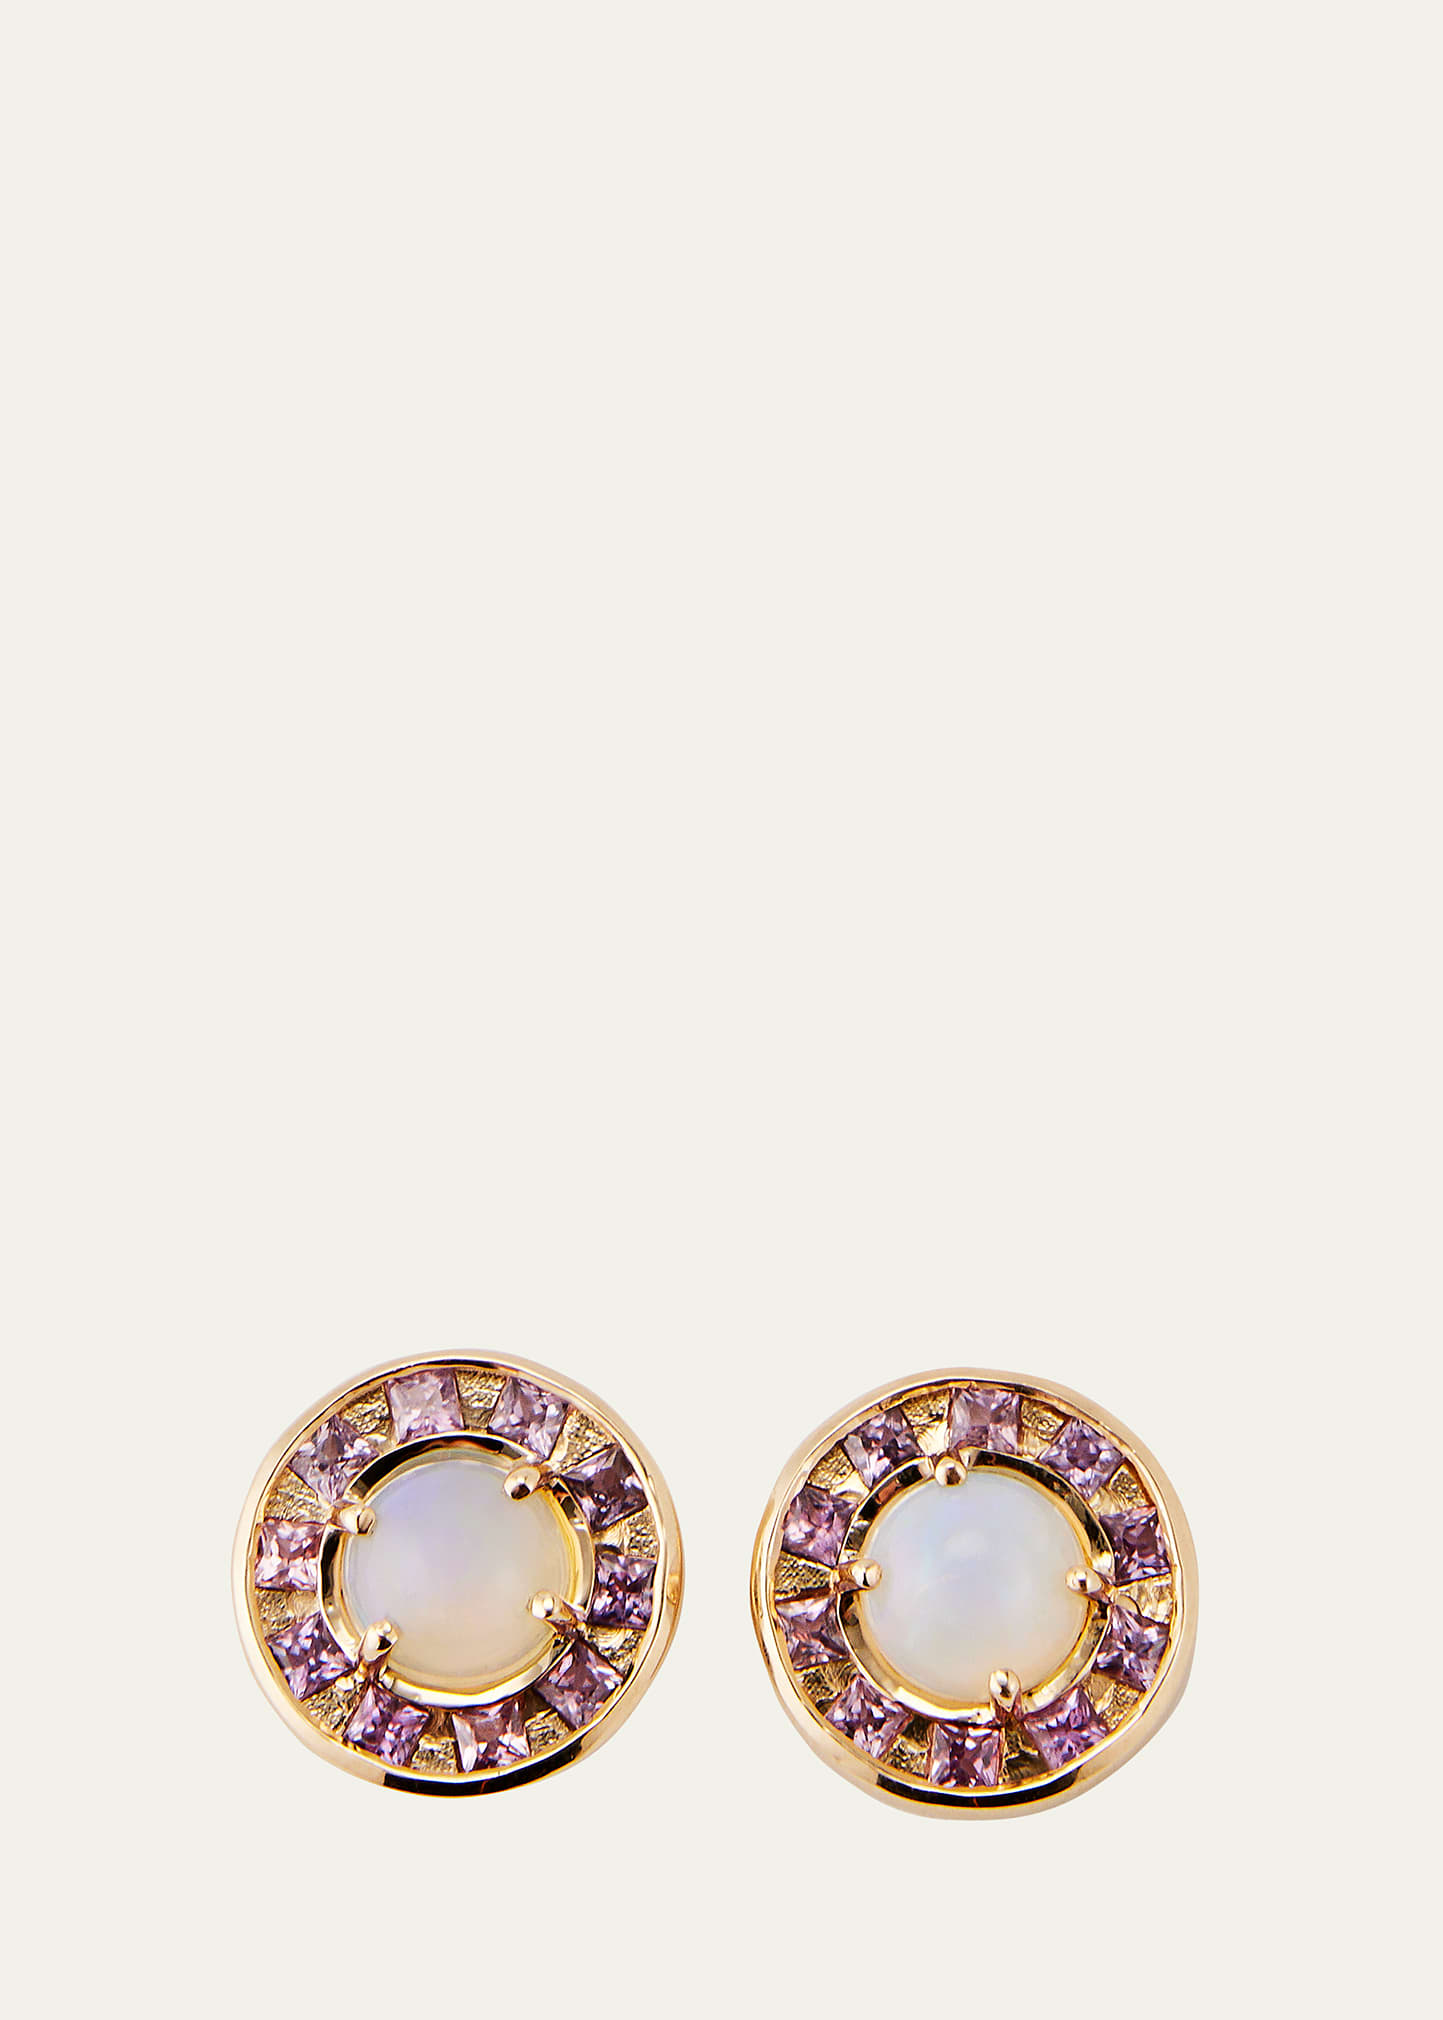 14k Gold Full Moon Pink Sapphire and Opal Earrings